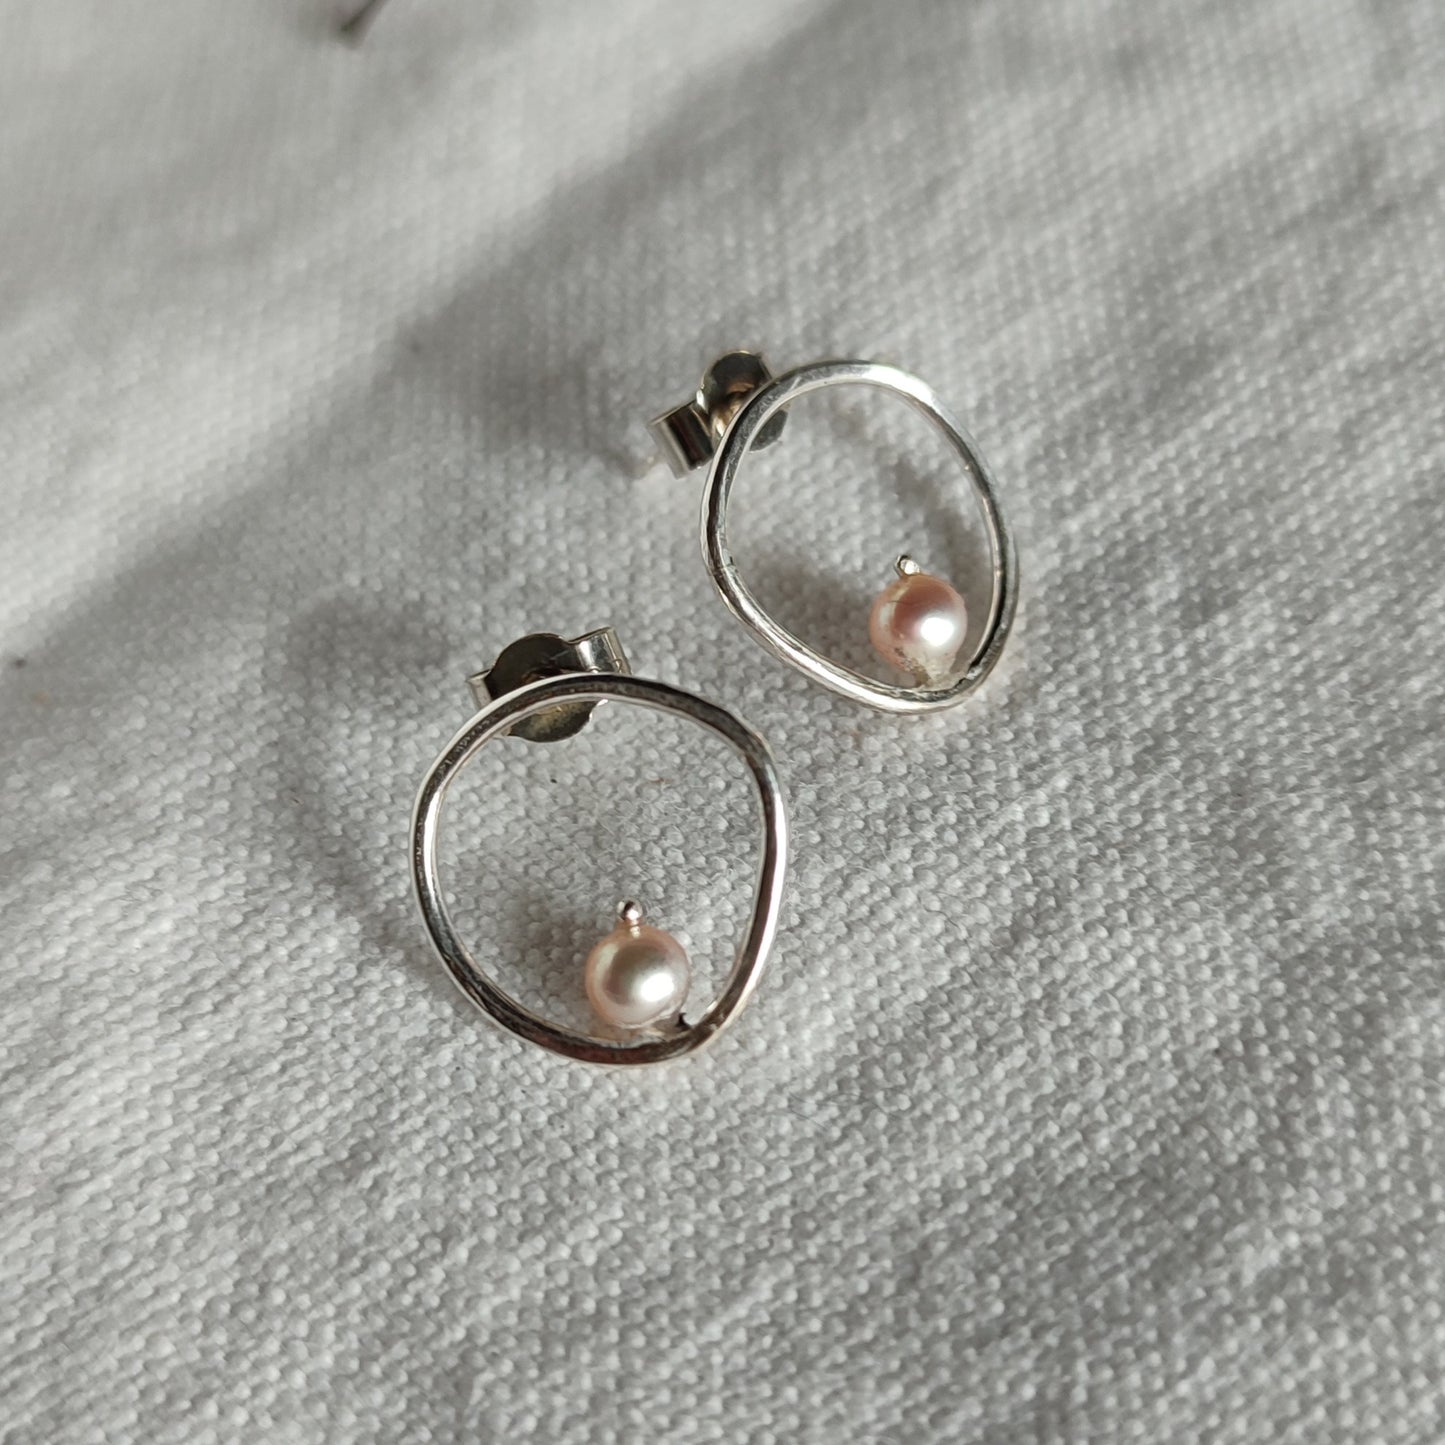 A pair of handcrafted silver earrings with pearls